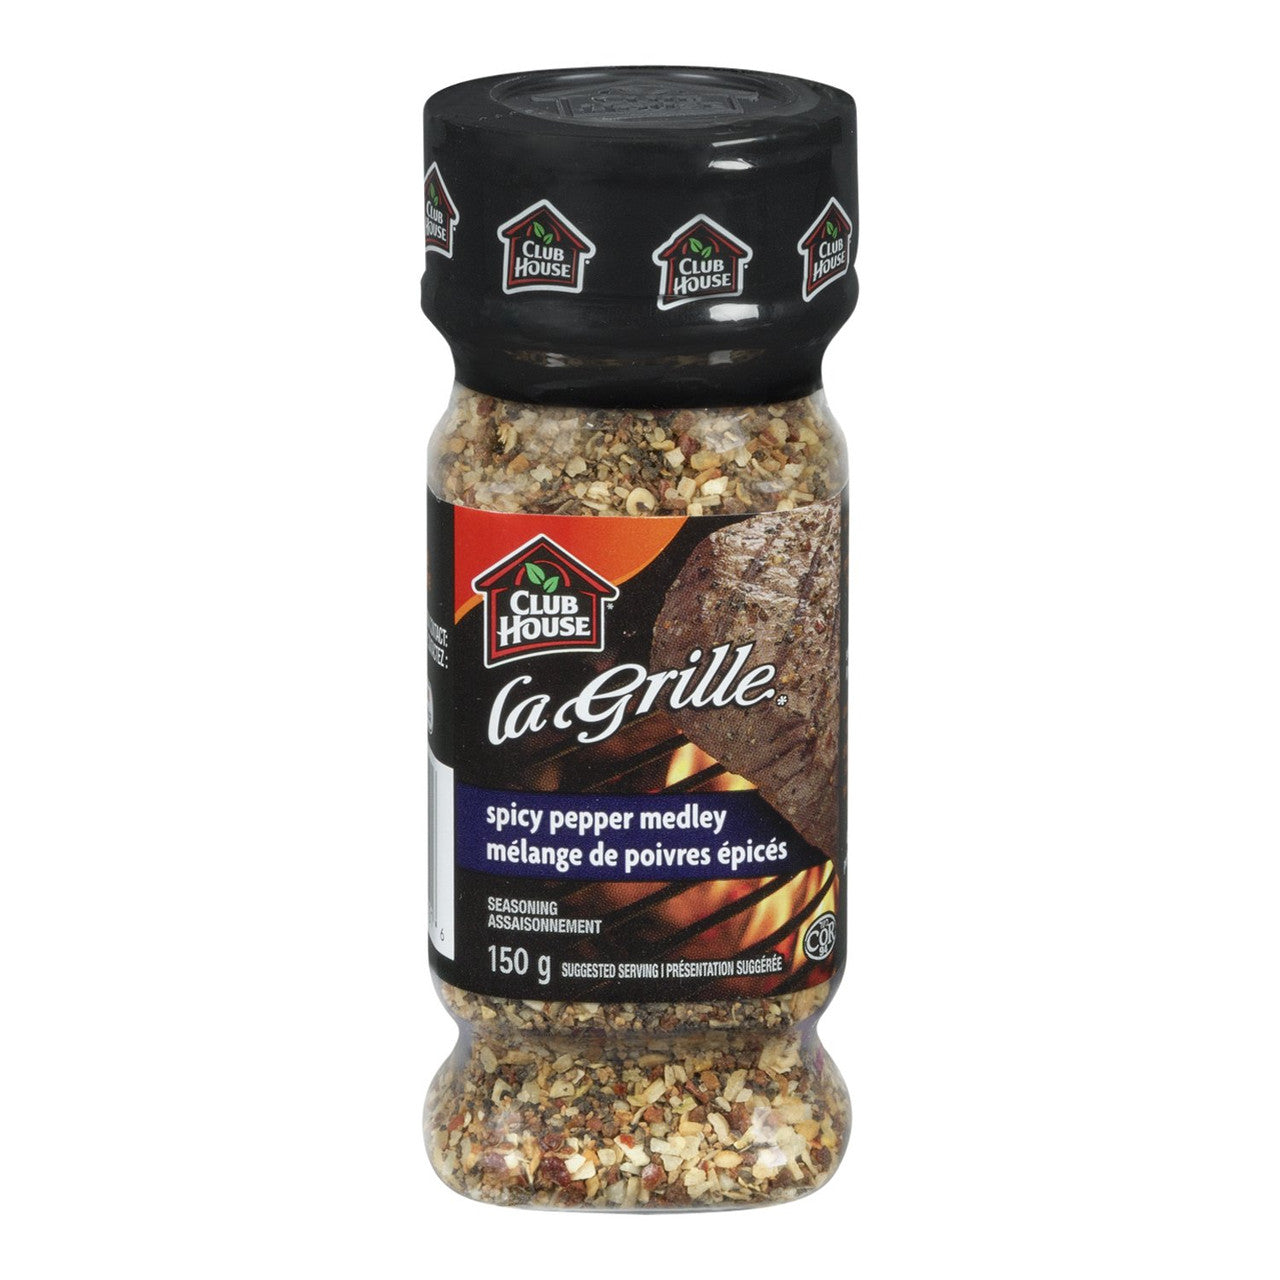 La Grille, Spicy Pepper Medley Seasoning, 150g/5.3oz., {Imported from Canada}